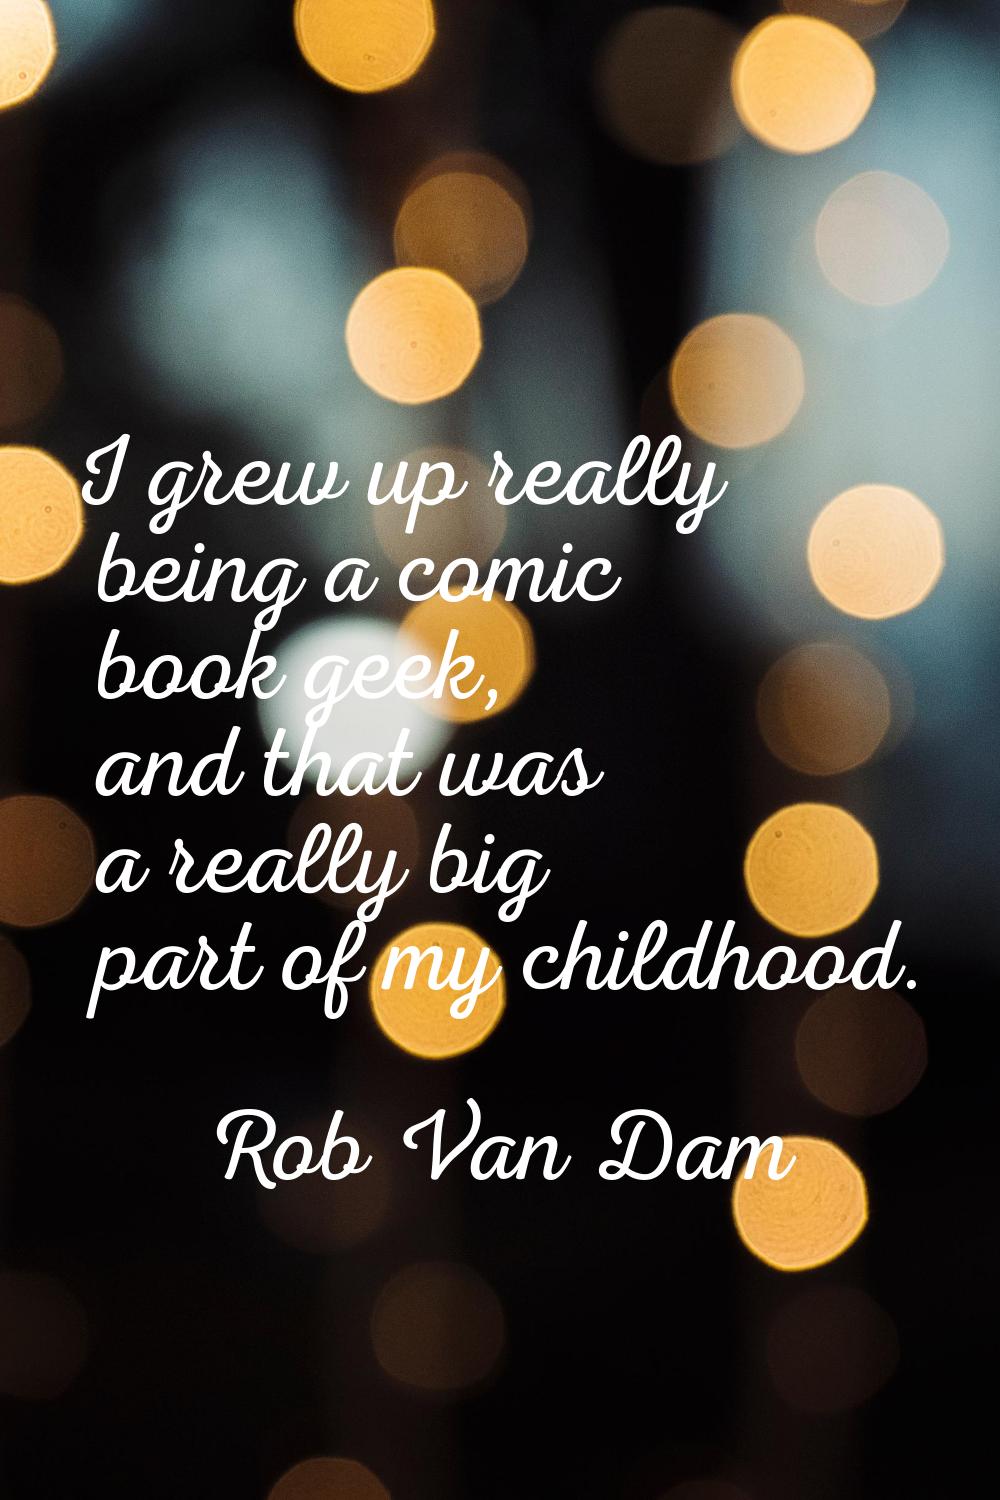 I grew up really being a comic book geek, and that was a really big part of my childhood.